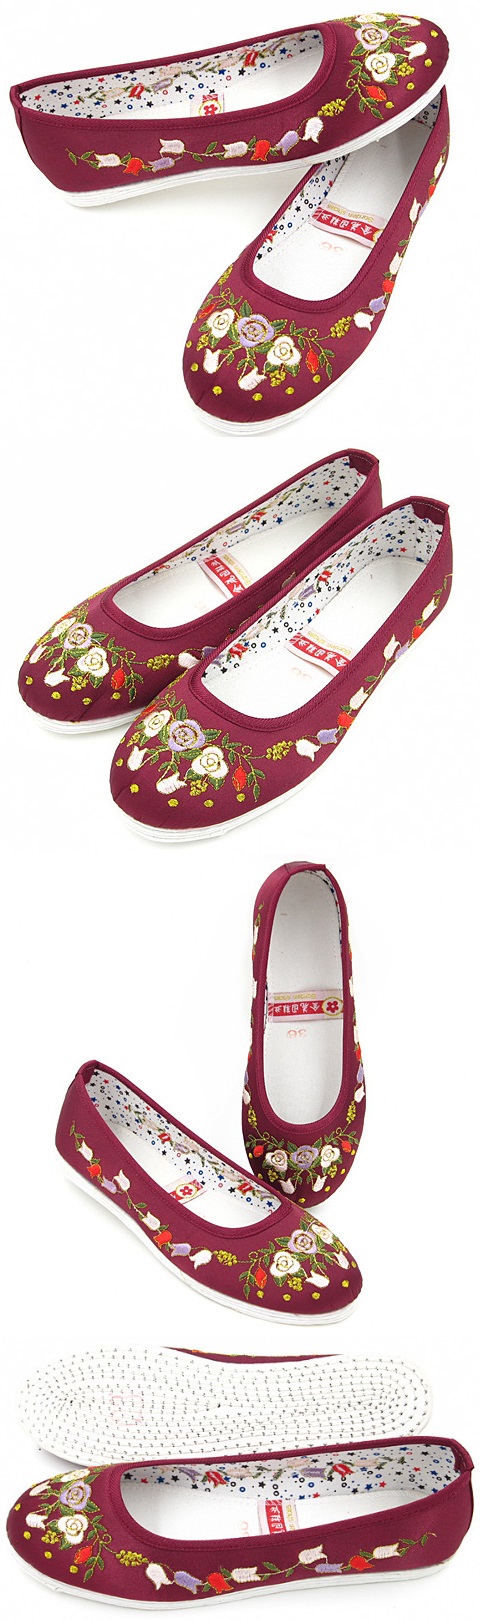 Satin Pomegranate Flower Embroidery Shoes (Burgundy)